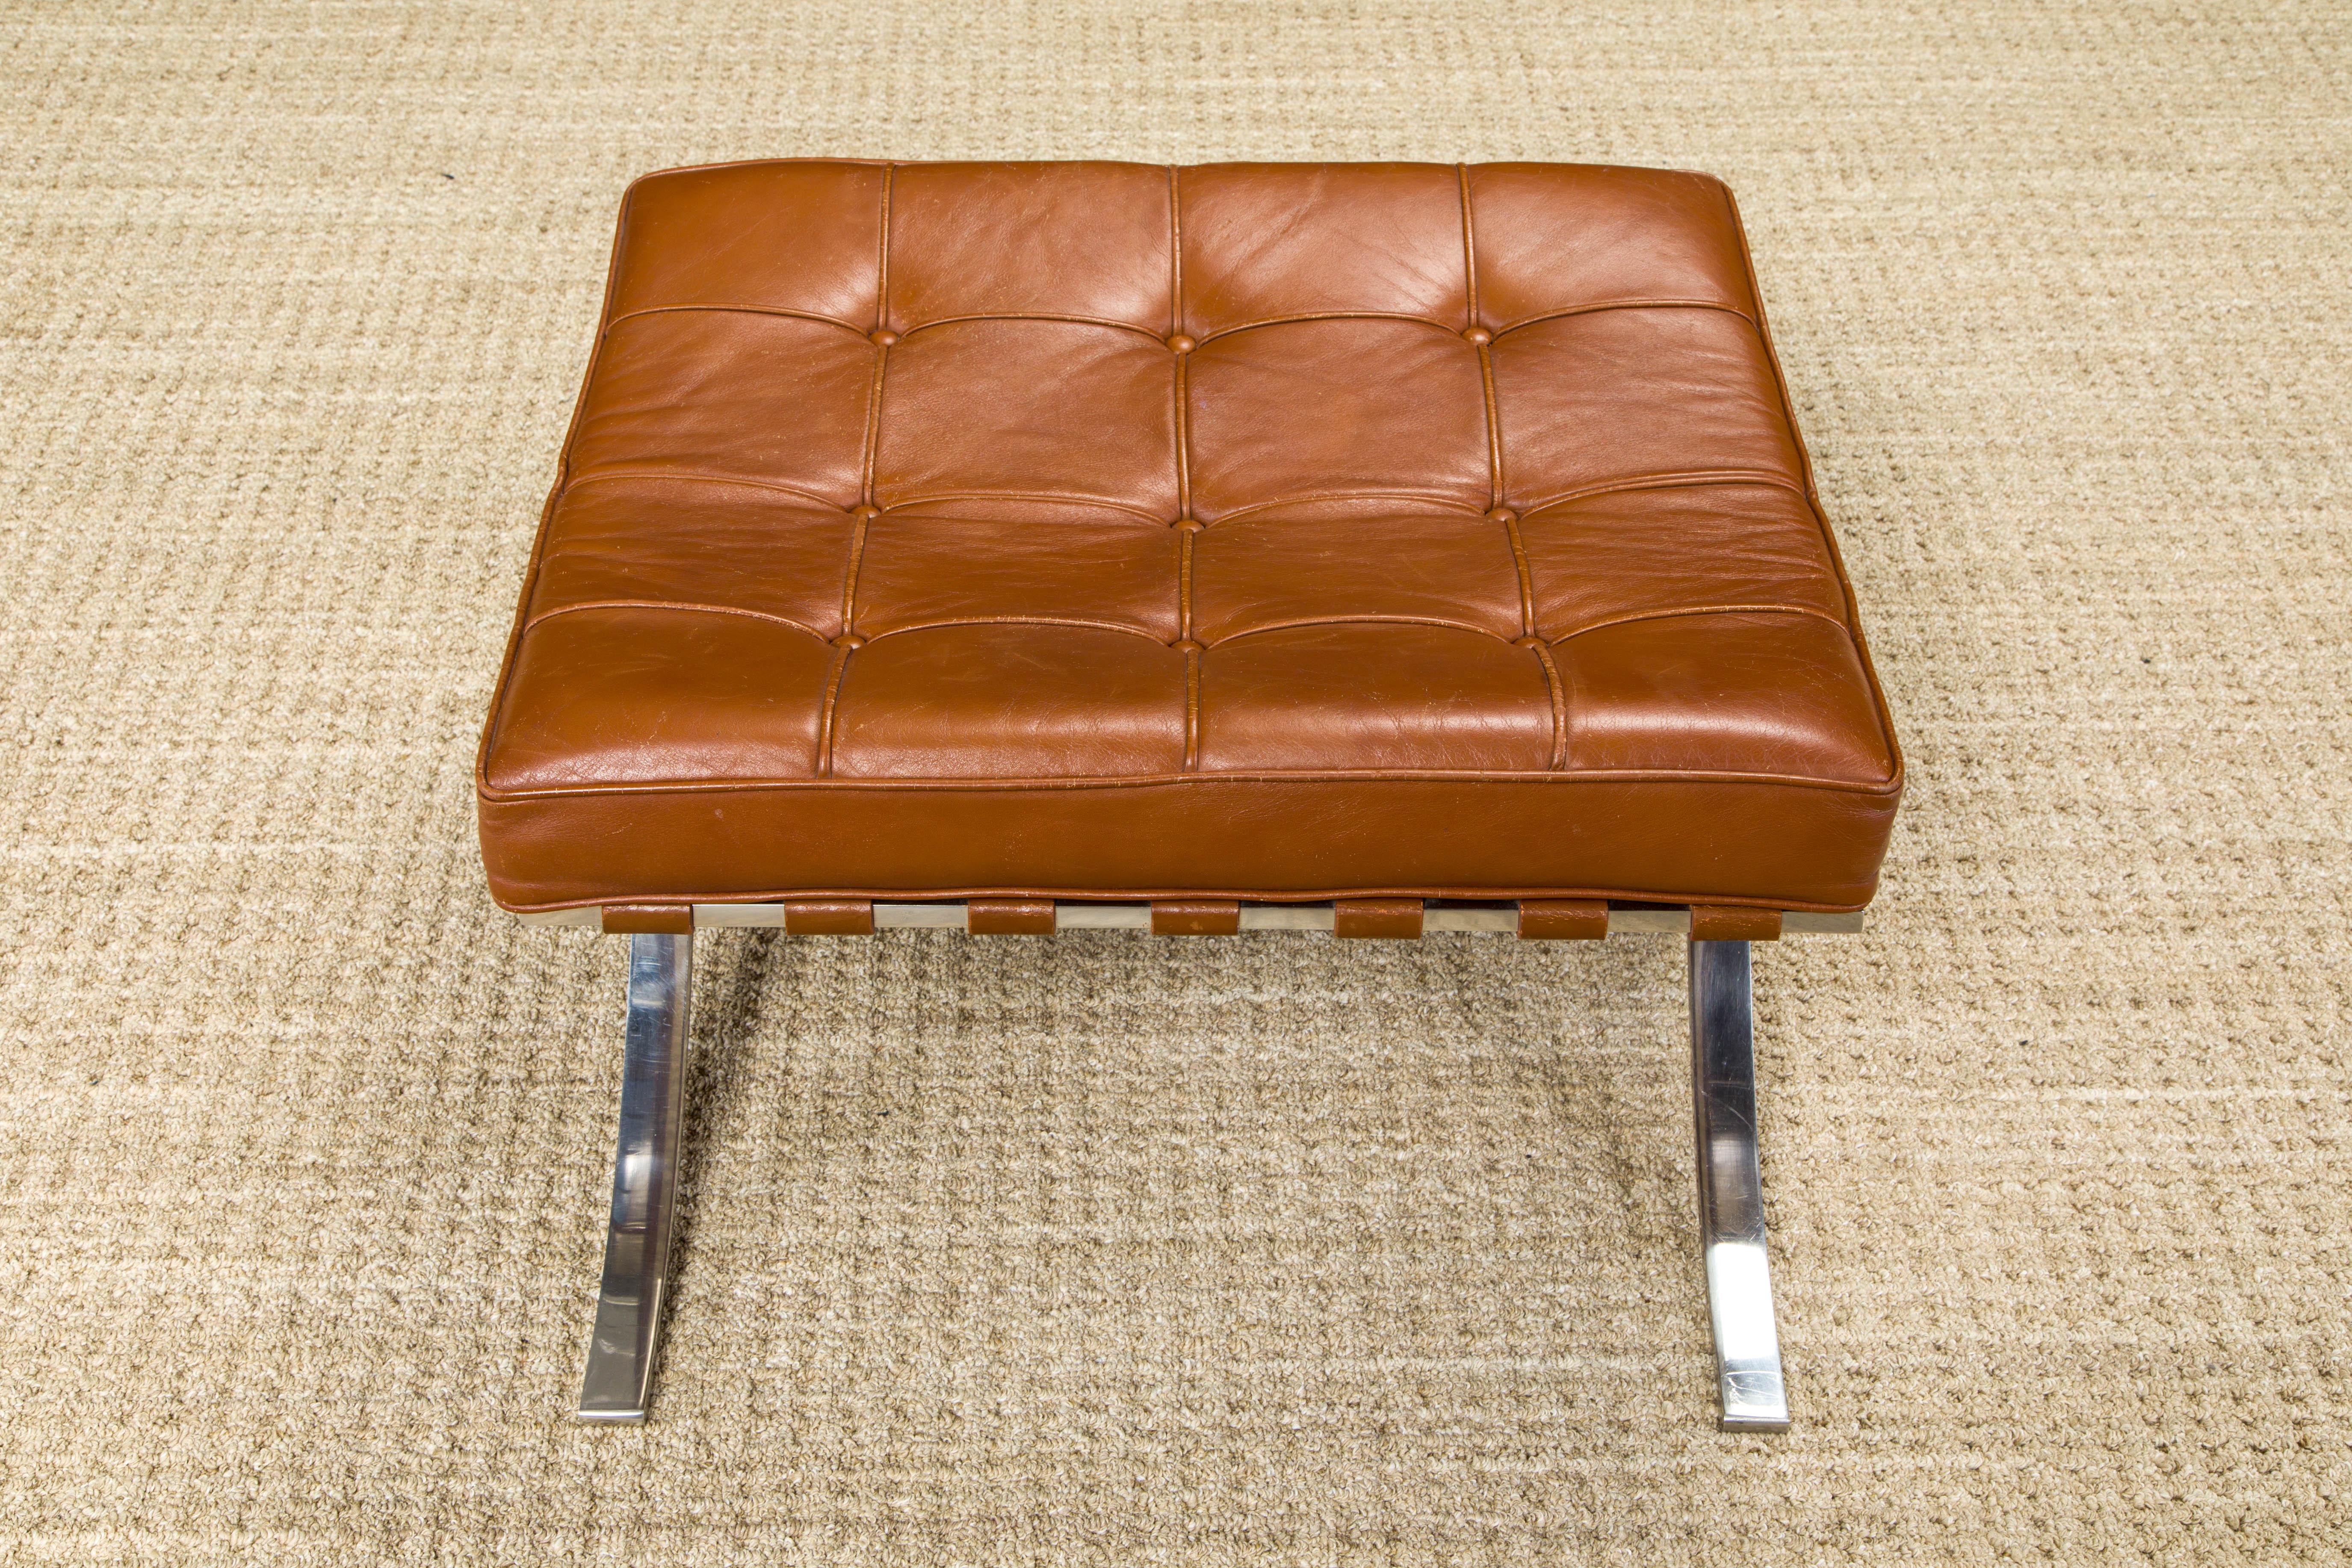 Mid-Century Modern 1st-Gen Knoll 'Barcelona' Stool by Mies Van Der Rohe, c. 1968, Double-Signed